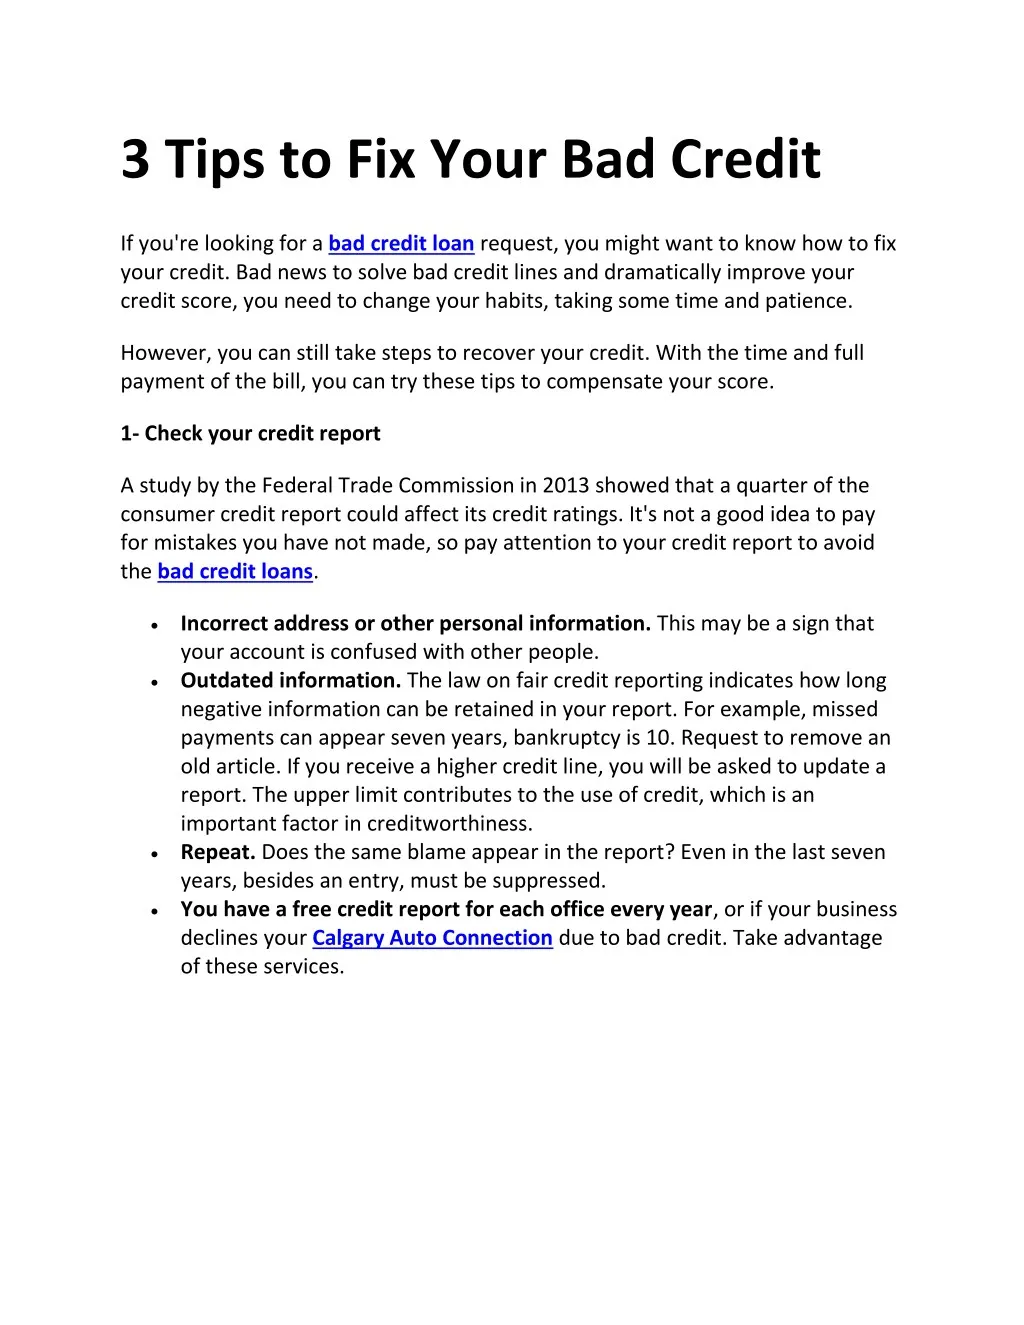 3 tips to fix your bad credit